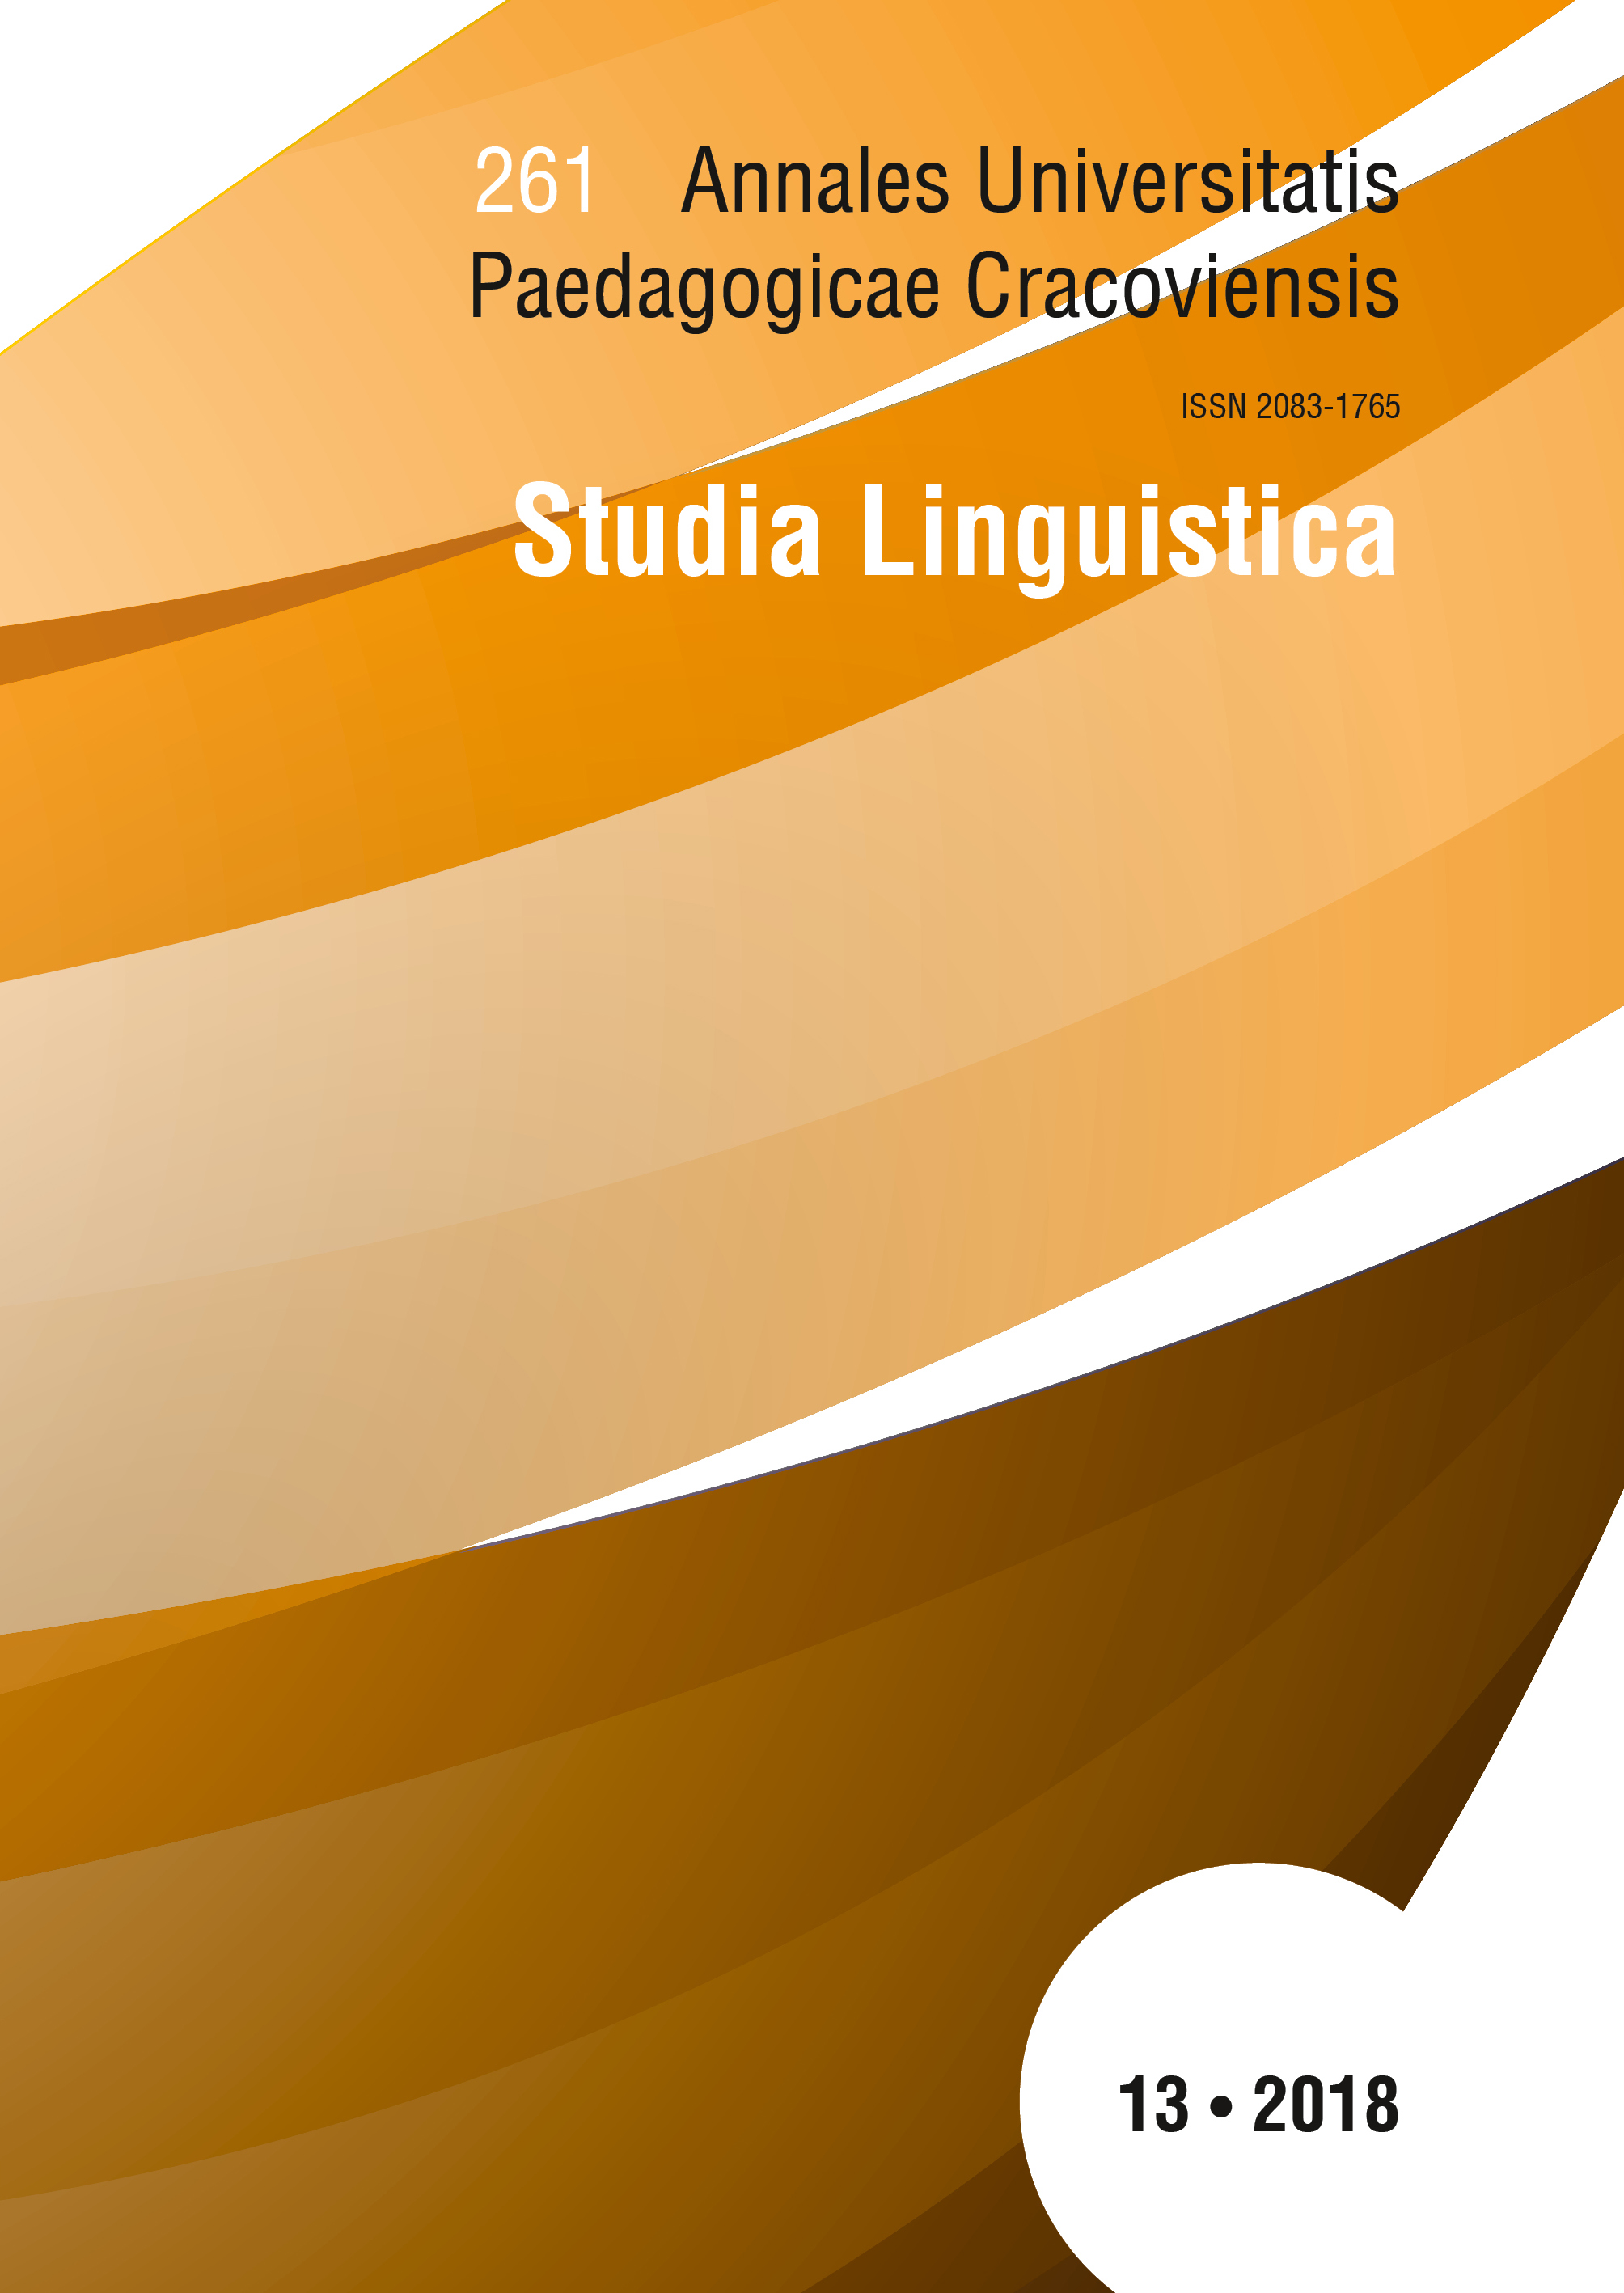 Mutism – one of the research areas of applied linguistics Cover Image